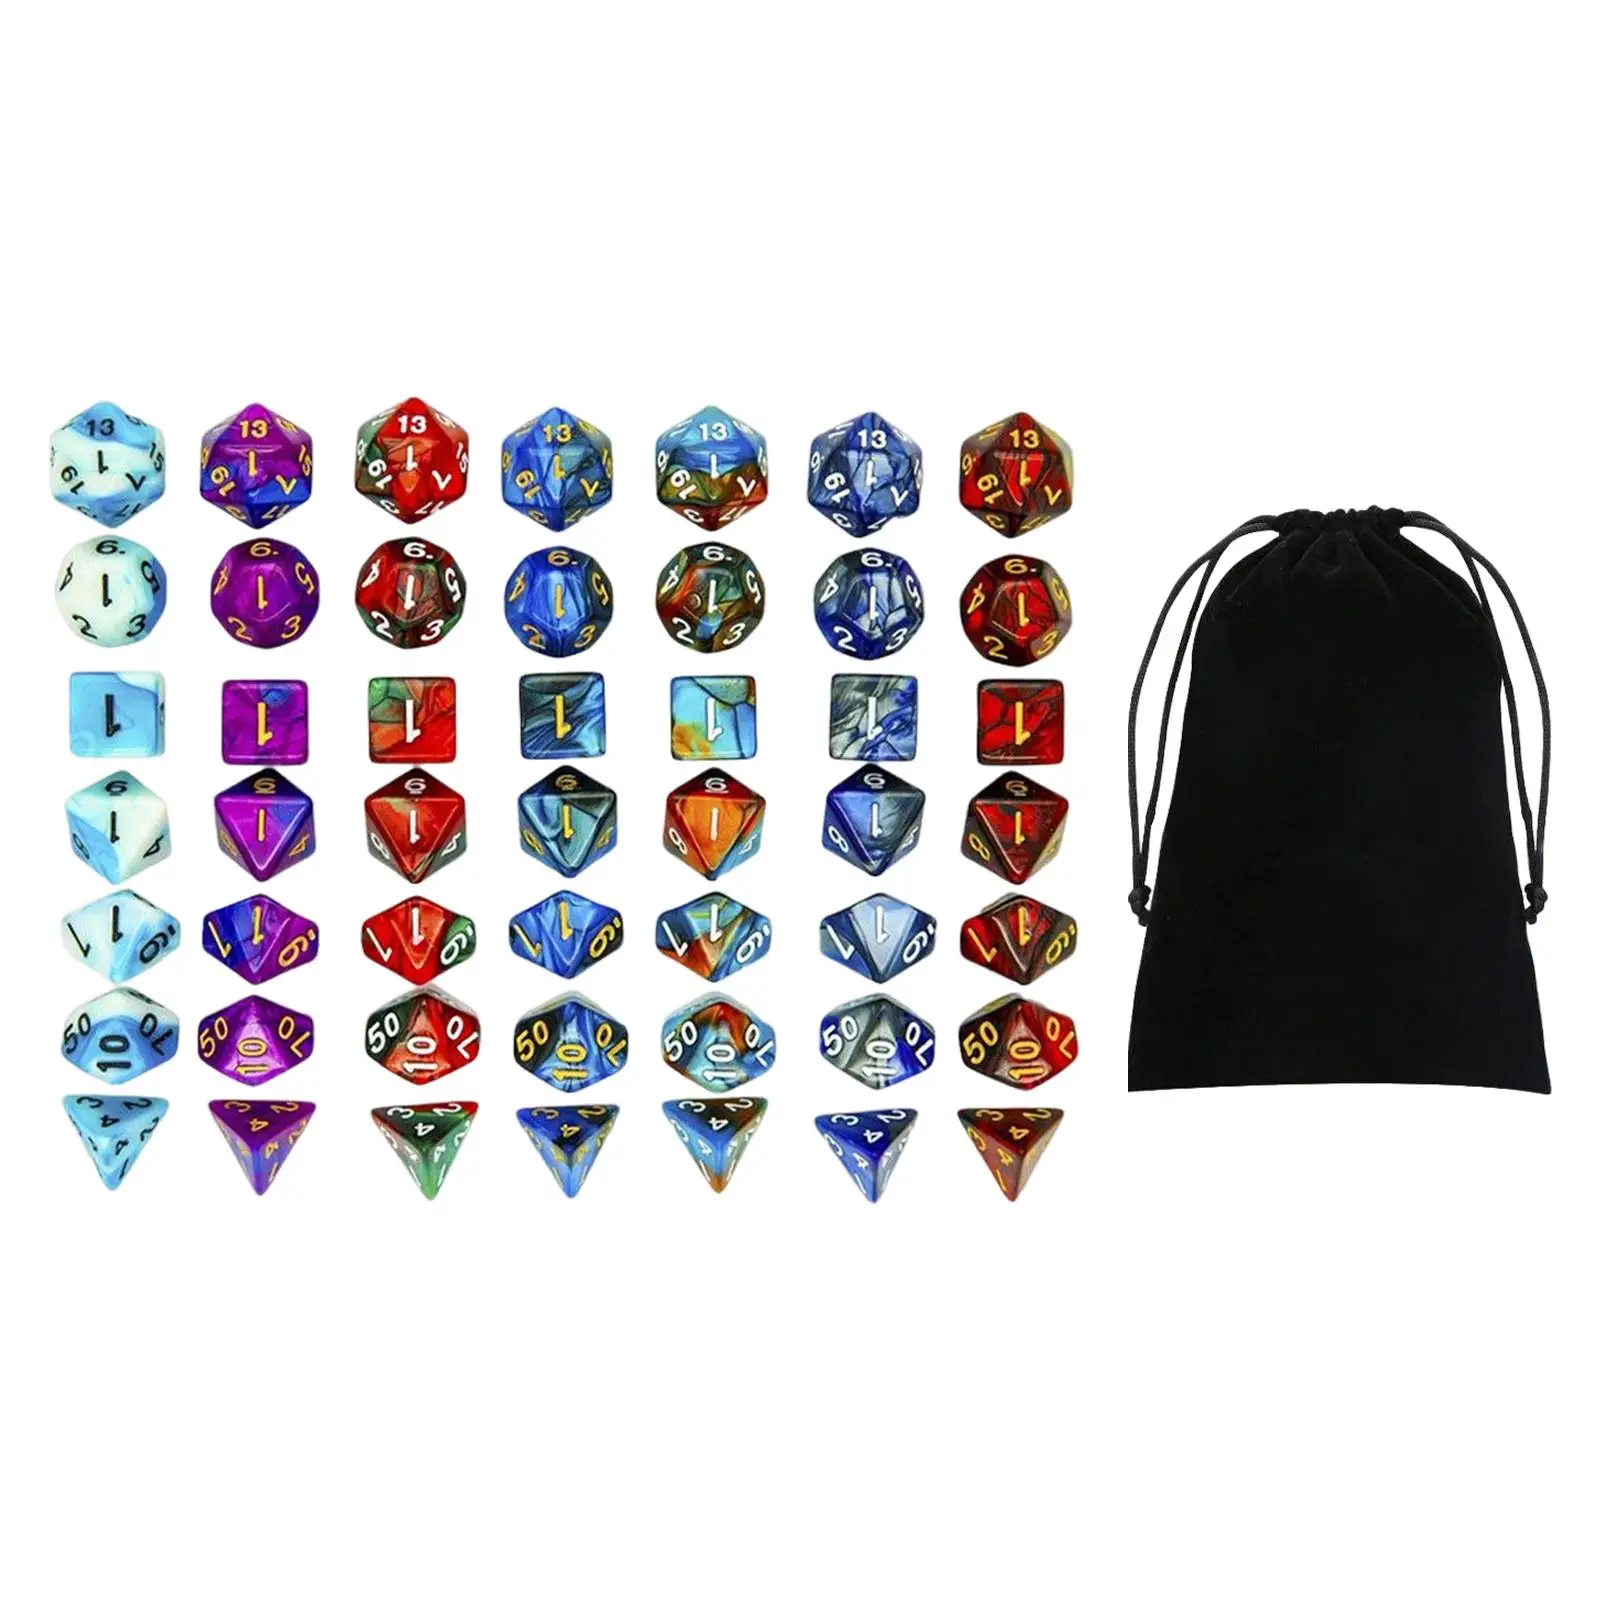 Acrylic Polyhedral Dices Set D4 D20 Bar Toys with Pouch for DND RPG Role Playing Table Games Math Teaching